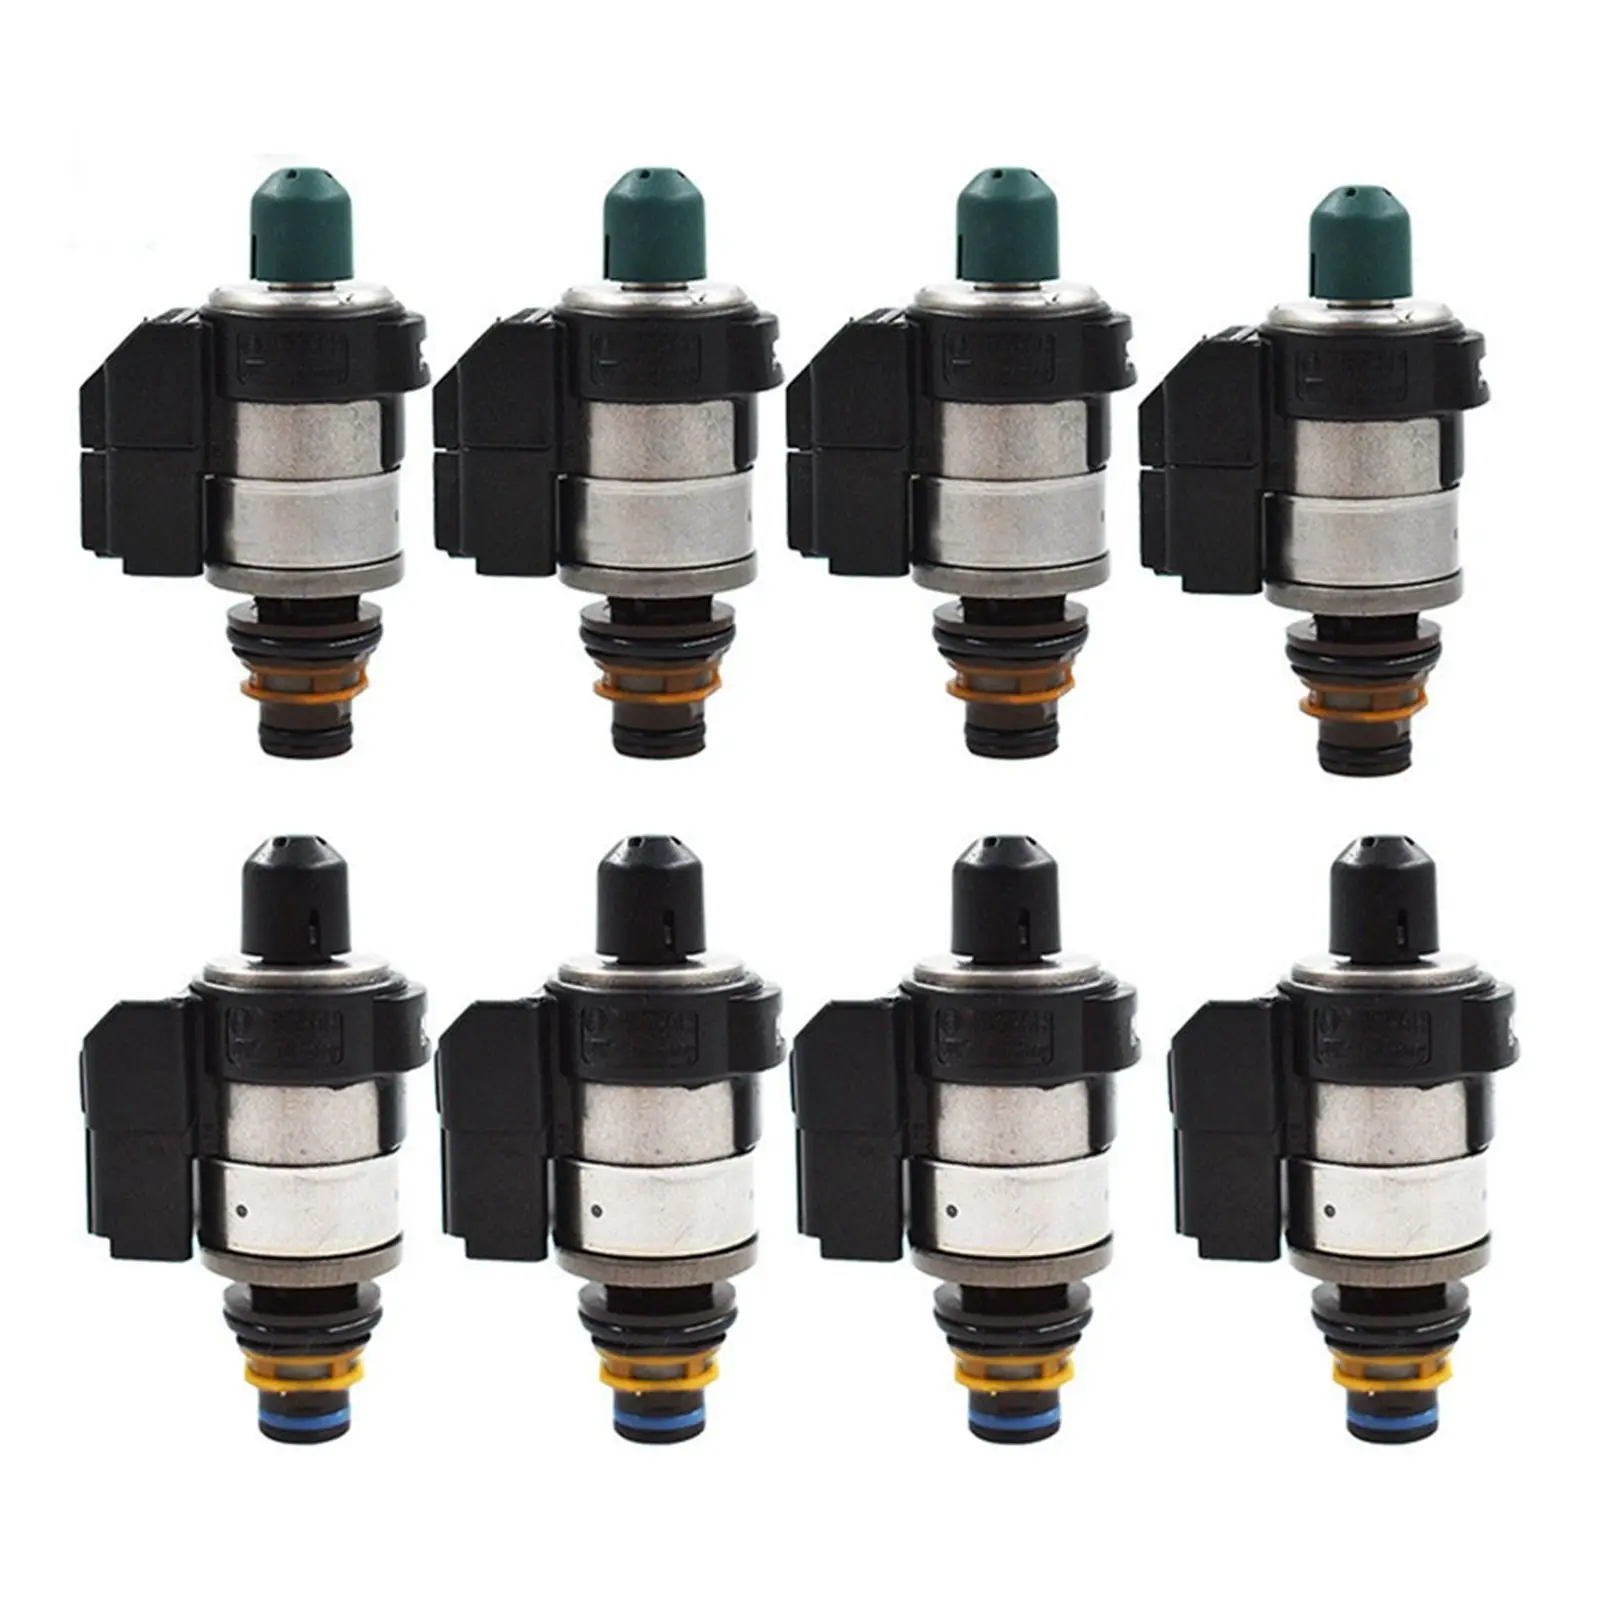 8x Car Transmission Solenoids Kit For 7 Speed Automatic Transmission 722.9 0260130035 Accessories